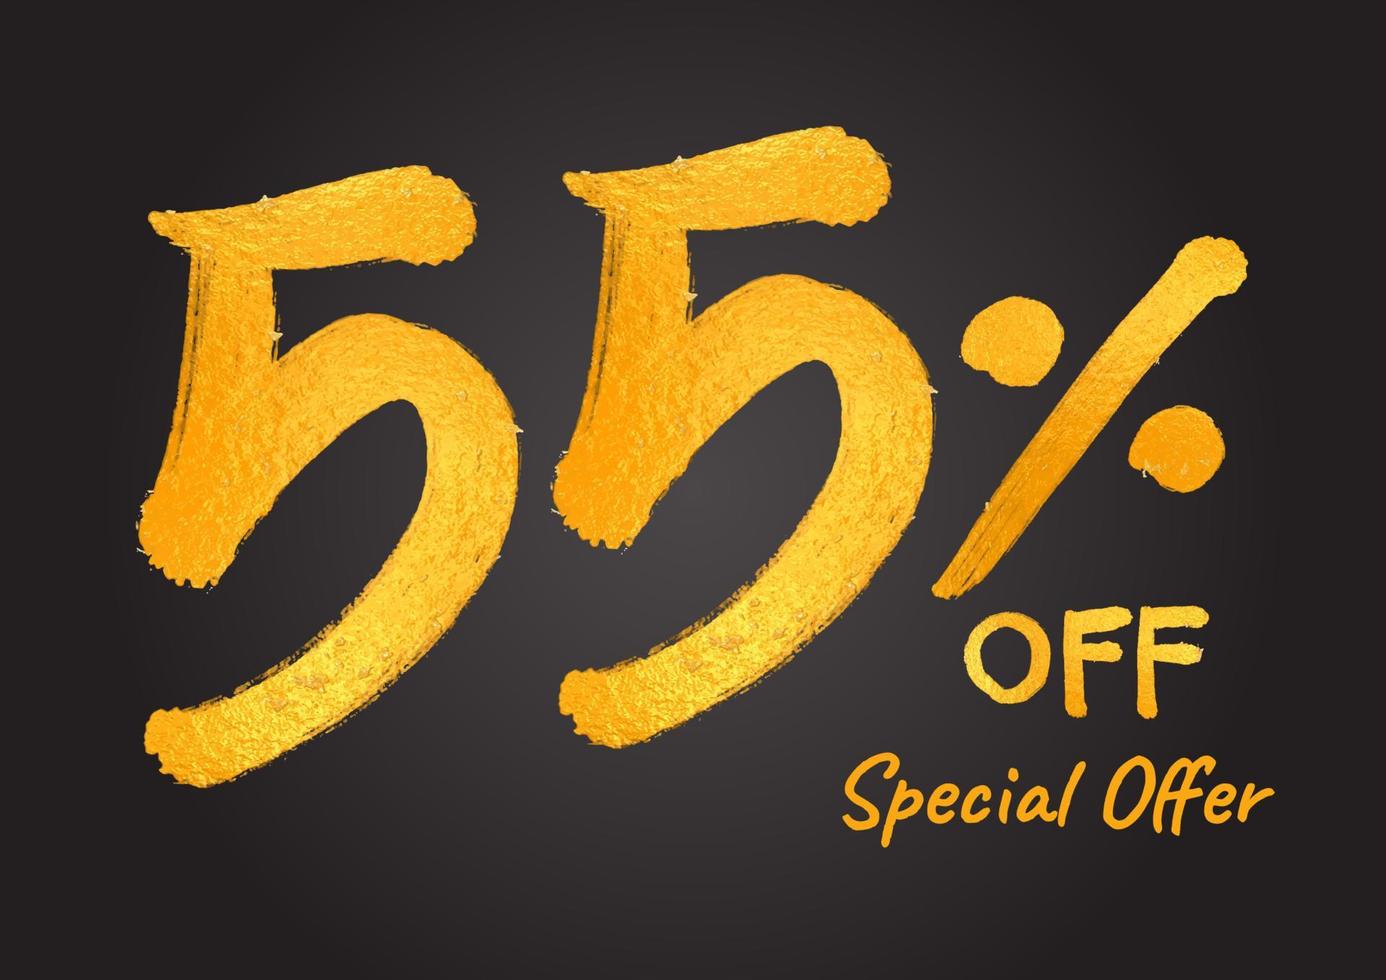 55 percent off Special Offer Gold Lettering Numbers brush drawing hand drawn sketch vector